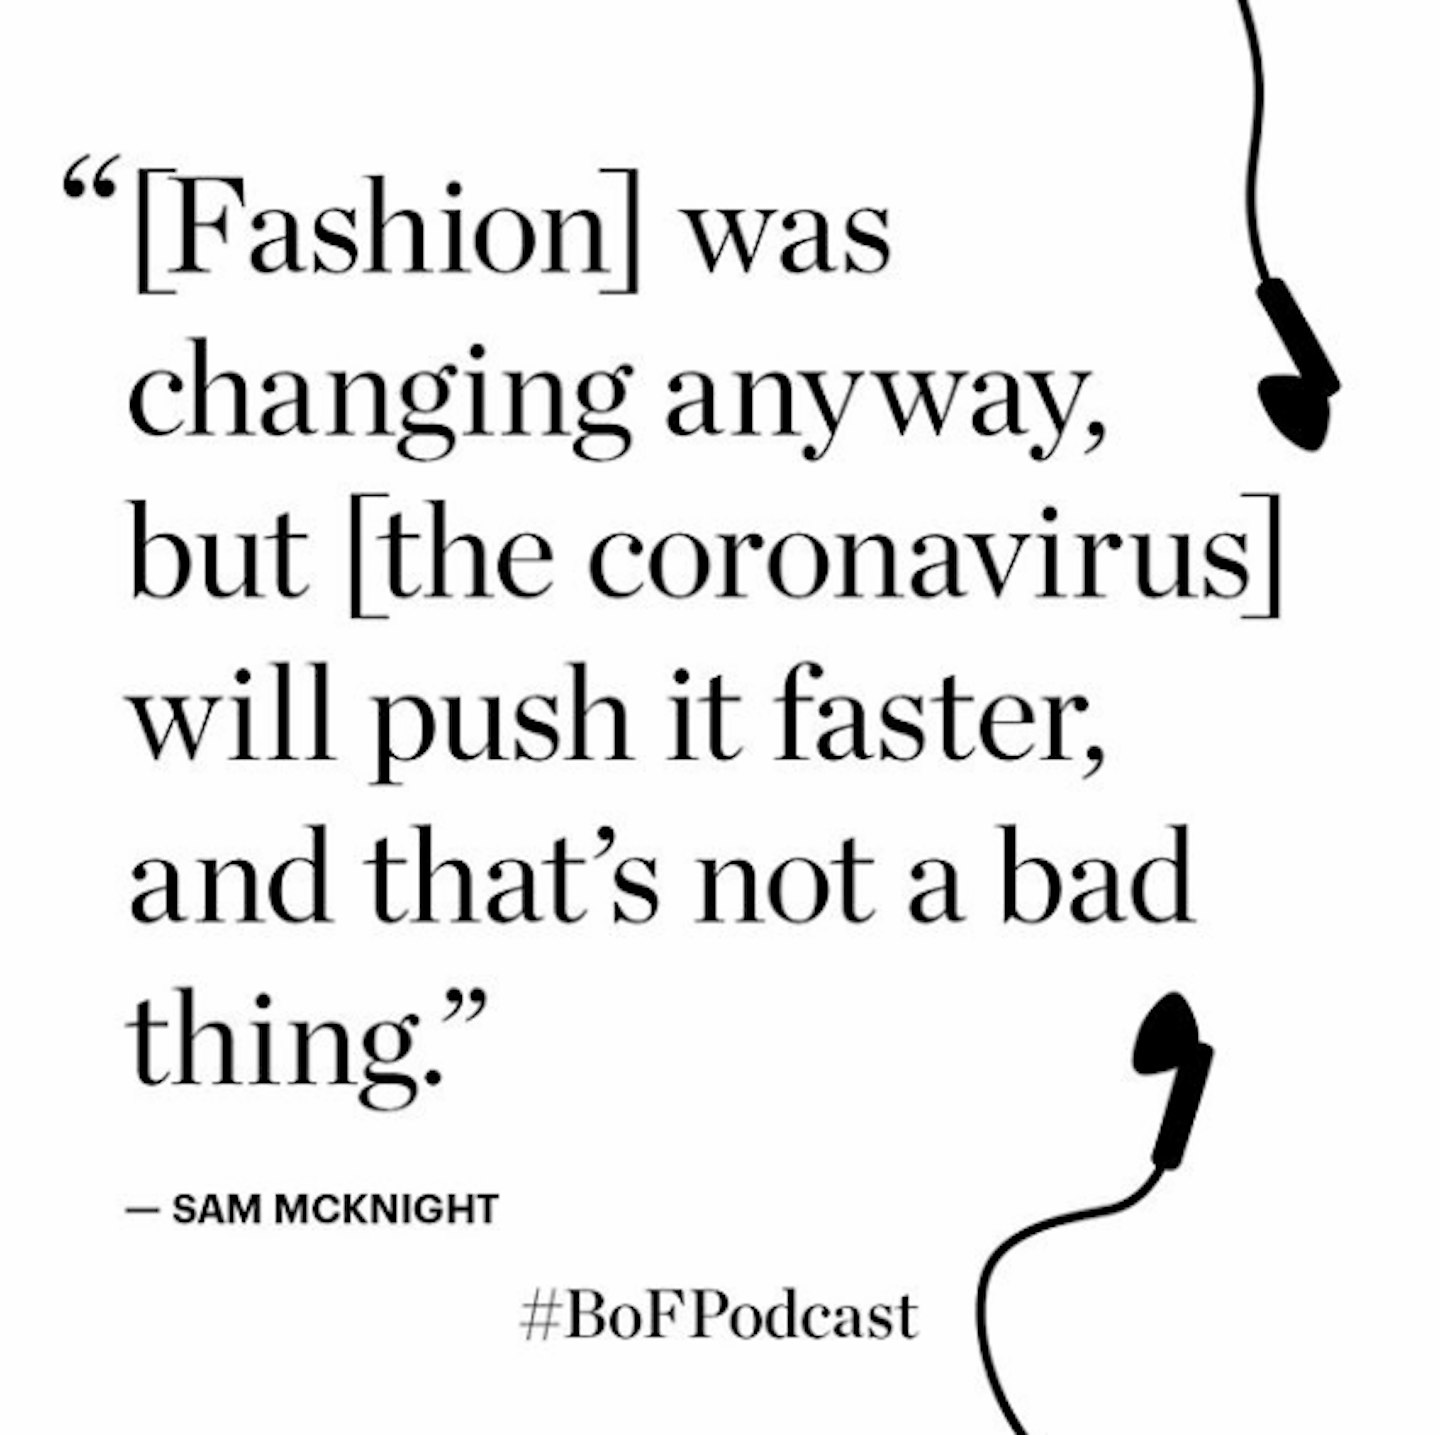 The BOF Podcast